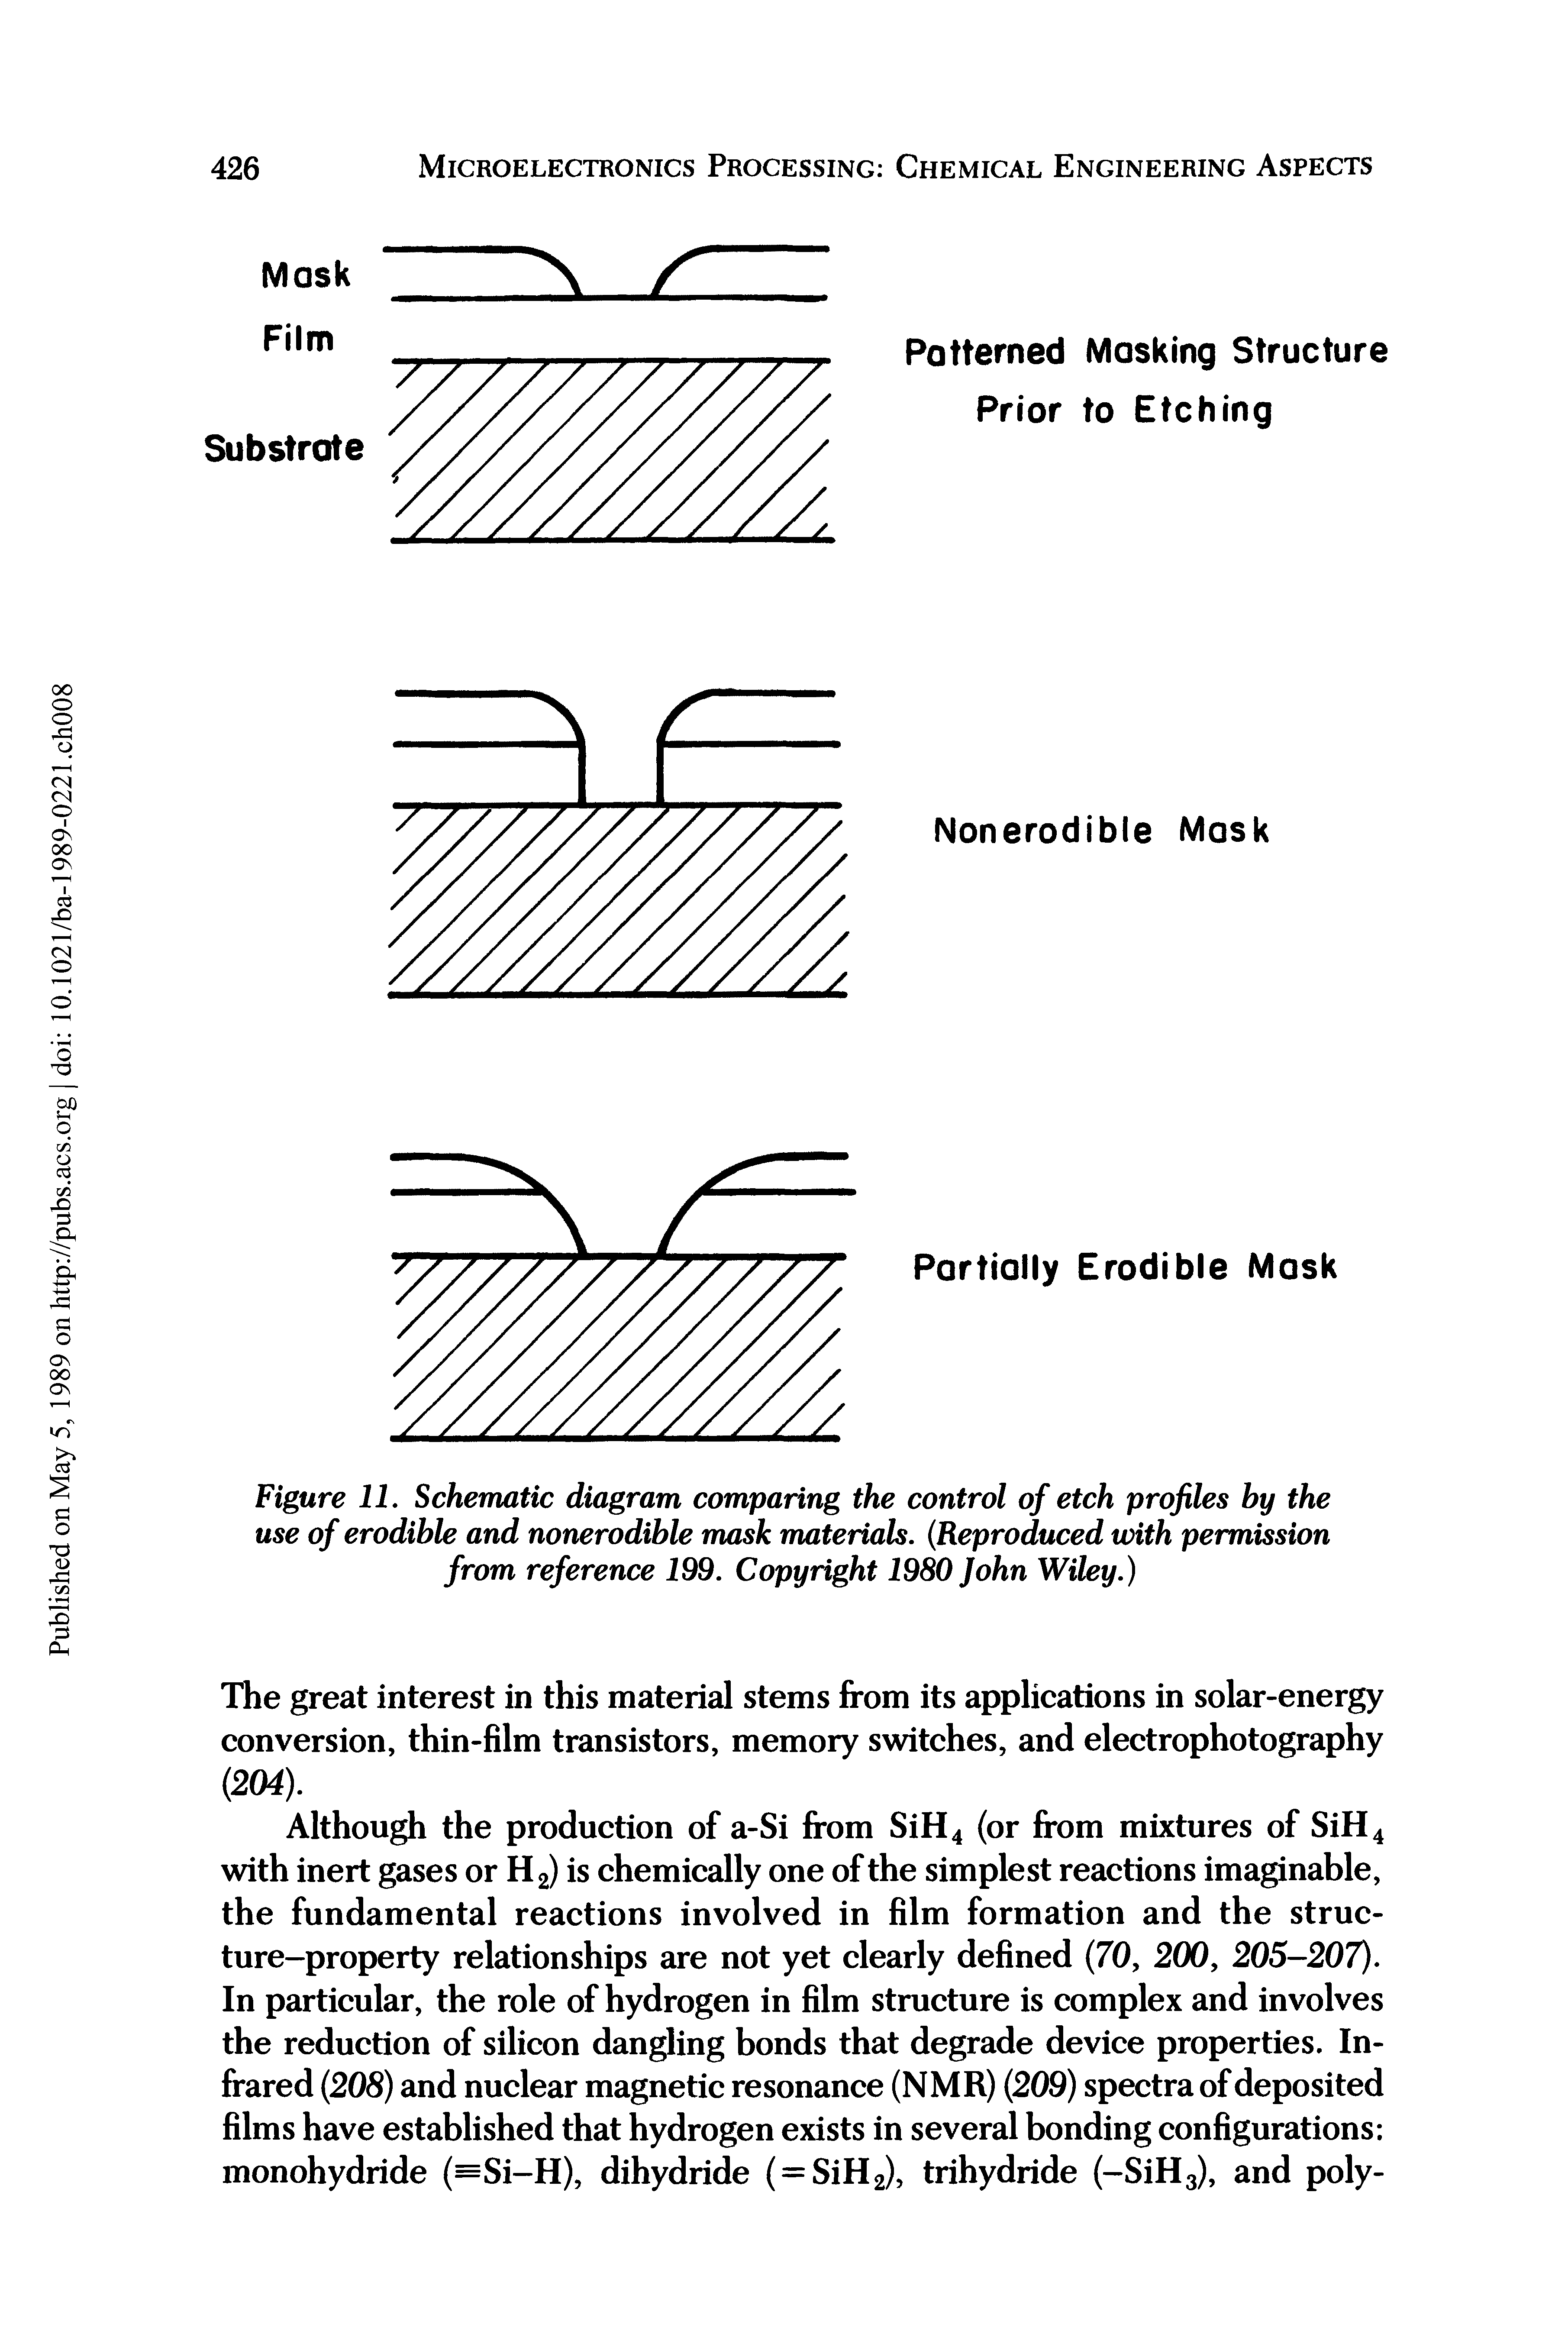 Figure 11. Schematic diagram comparing the control of etch profiles by the use of erodible and nonerodible mask materials. (Reproduced with permission from reference 199. Copyright 1980 John Wiley.)...